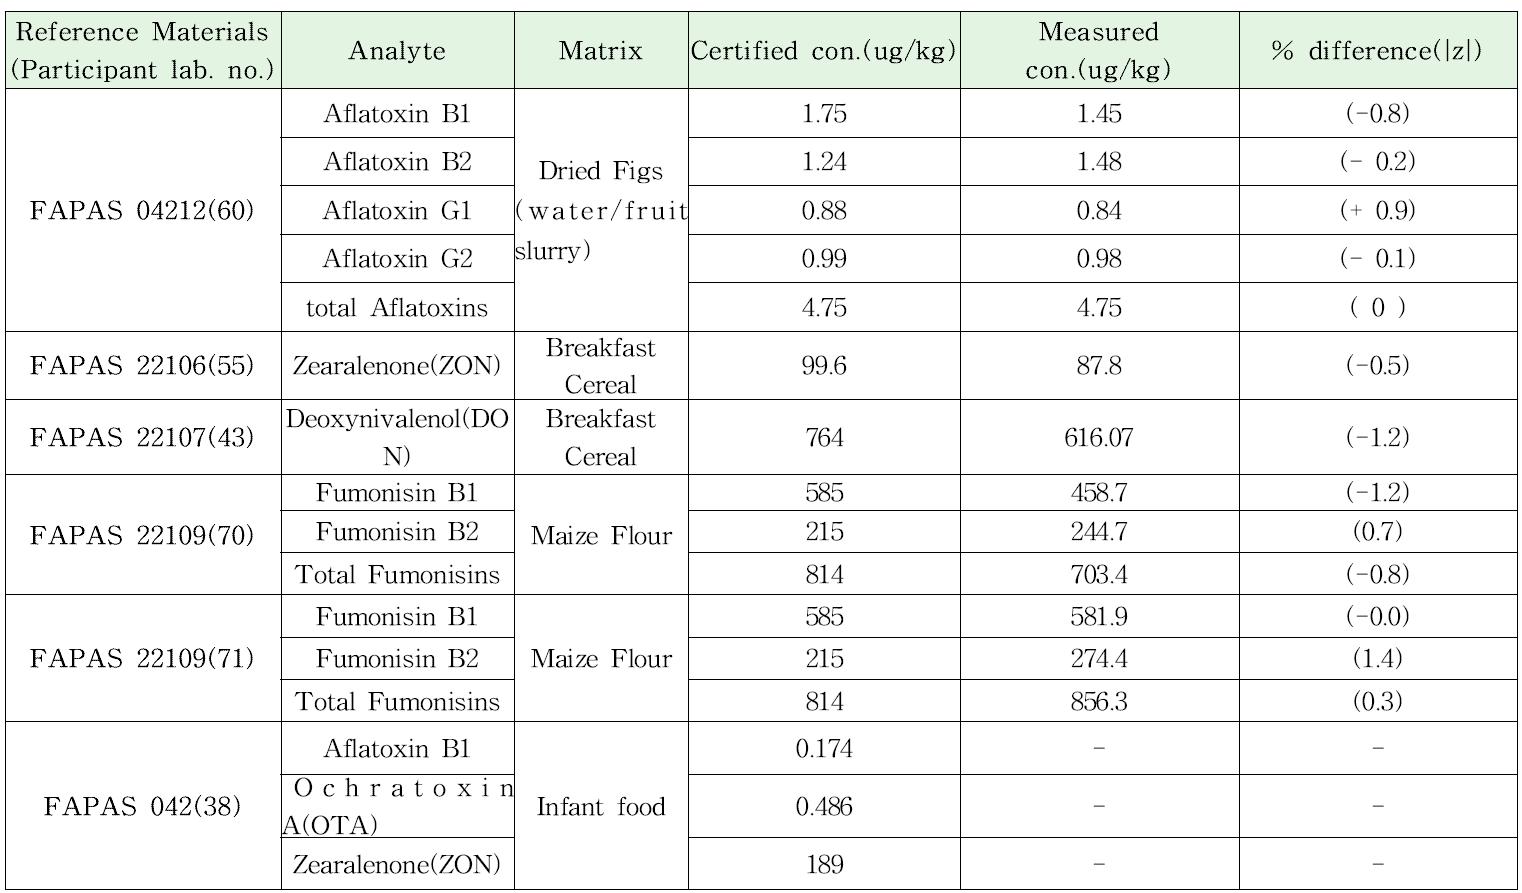 Analysis of Reference Materials and Comparison between Assigned and Measures Concentrations.